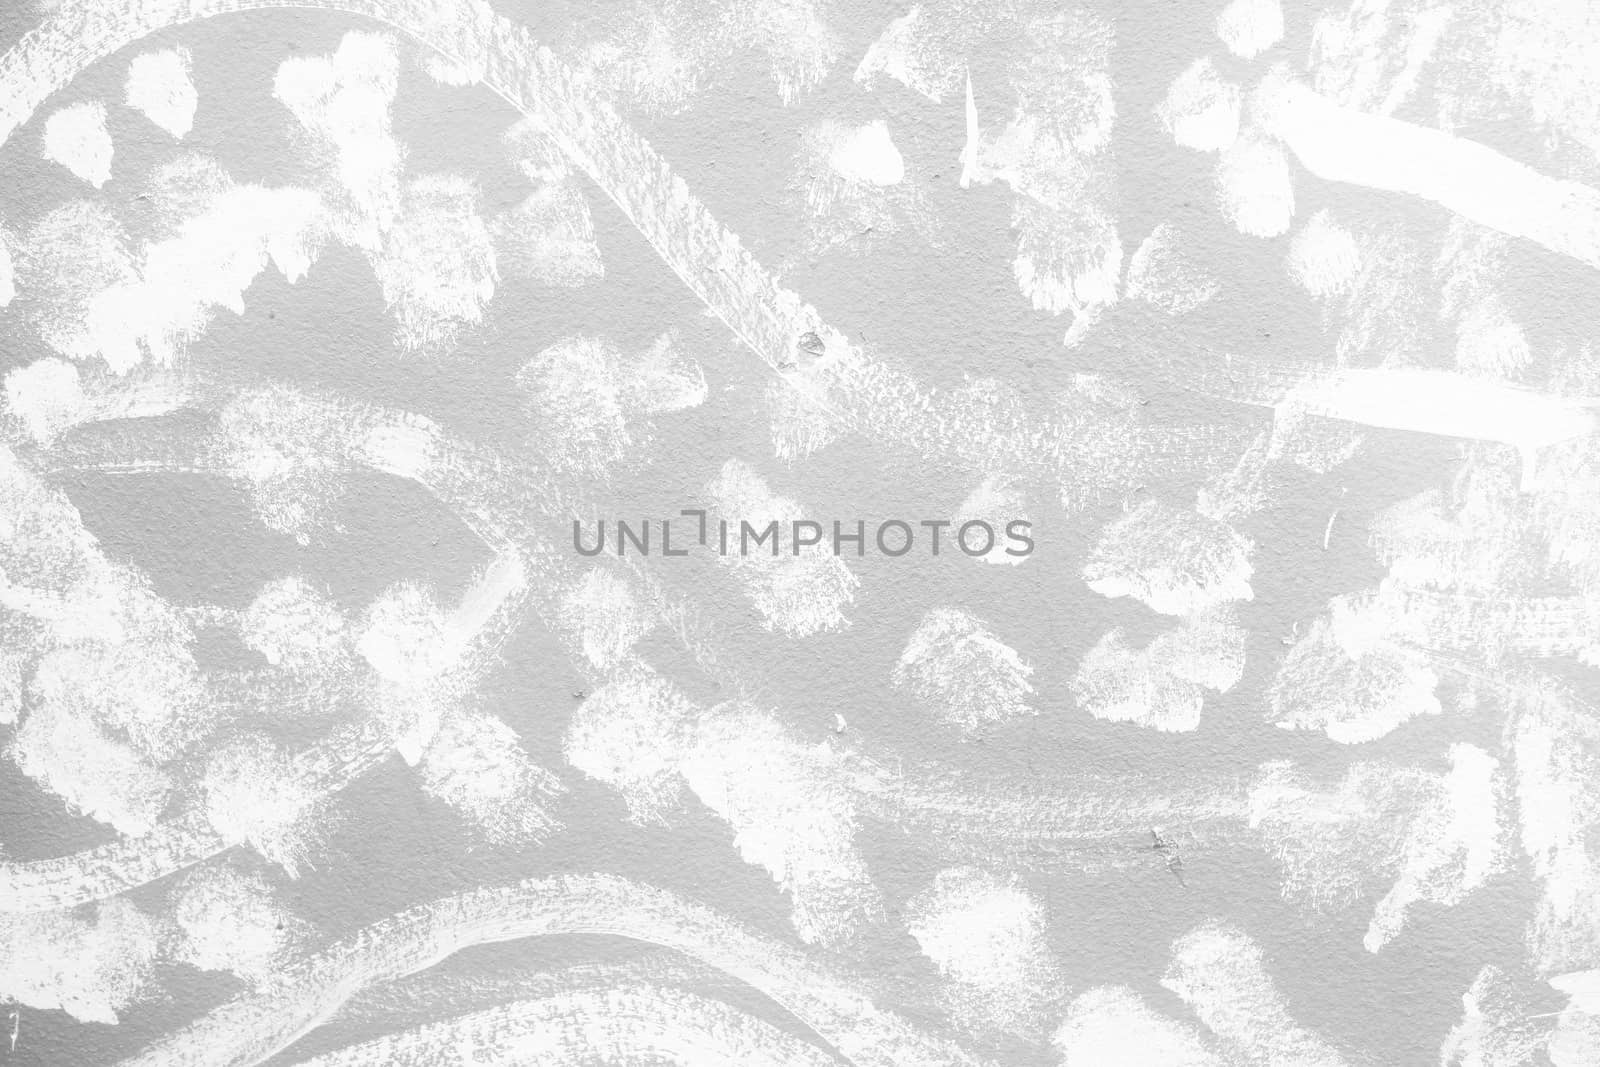 Unfinished White Painting on Grunge Concrete Wall Texture Background. by mesamong